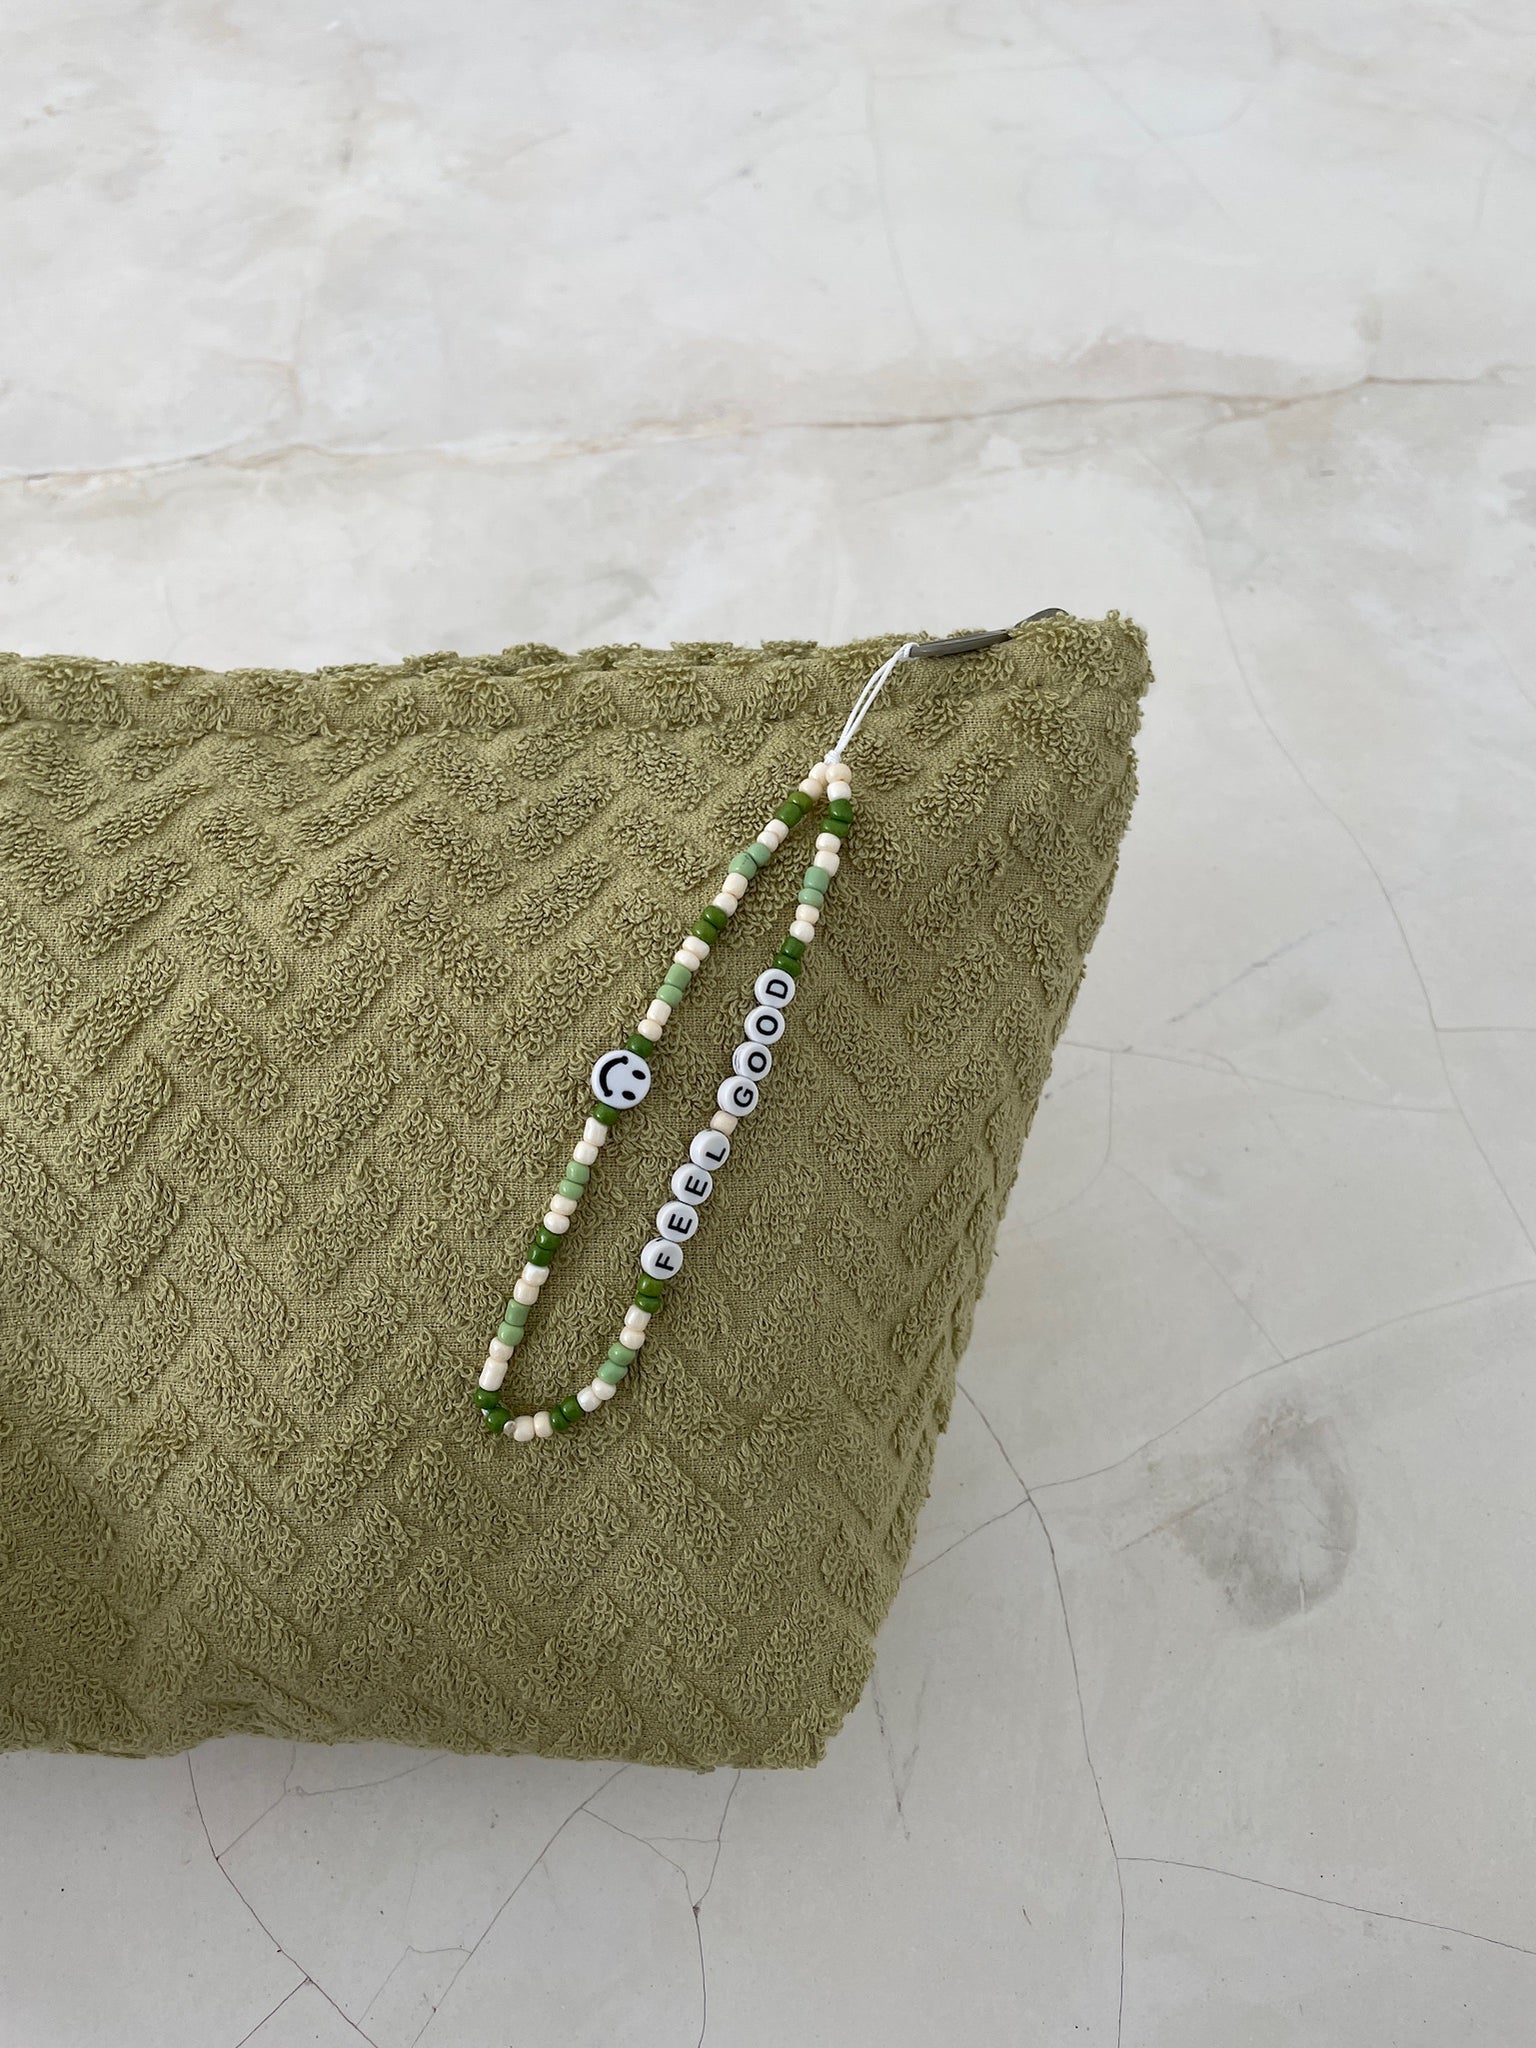 TERRY TOWEL POUCH in GREEN